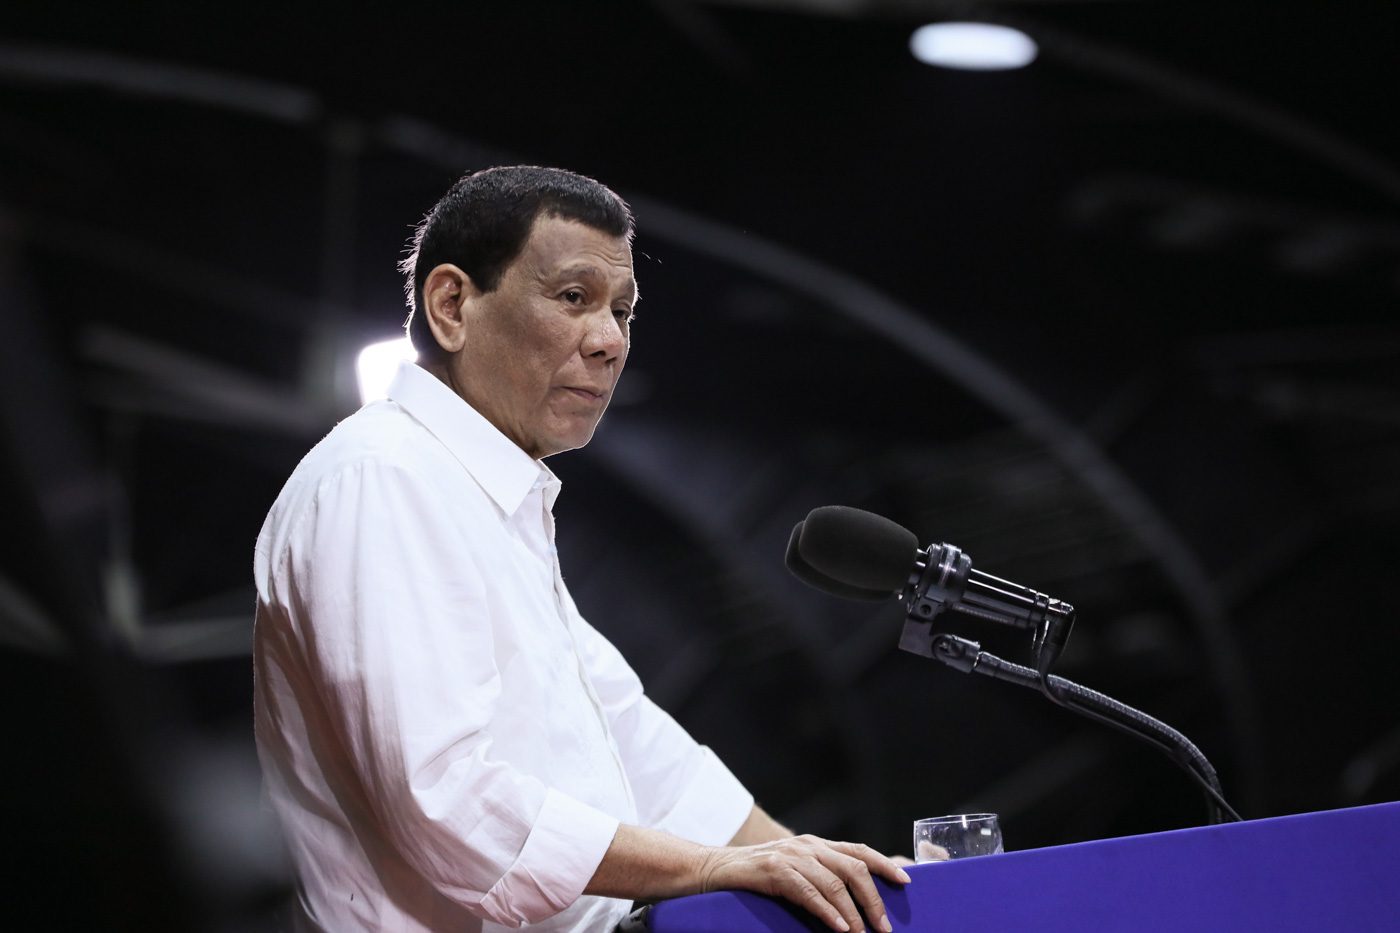 Duterte trust, approval ratings unchanged after Recto Bank incident